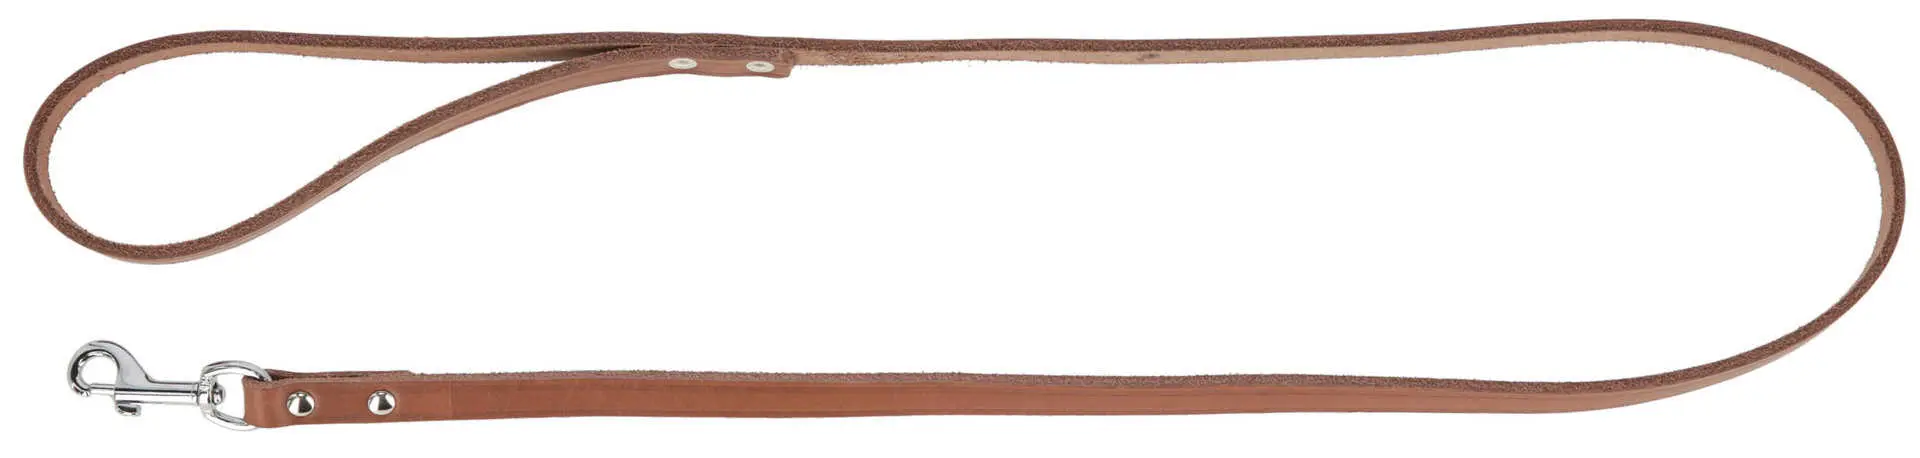 MEXICA Leash taupe 12 mm, 100 cm riveted